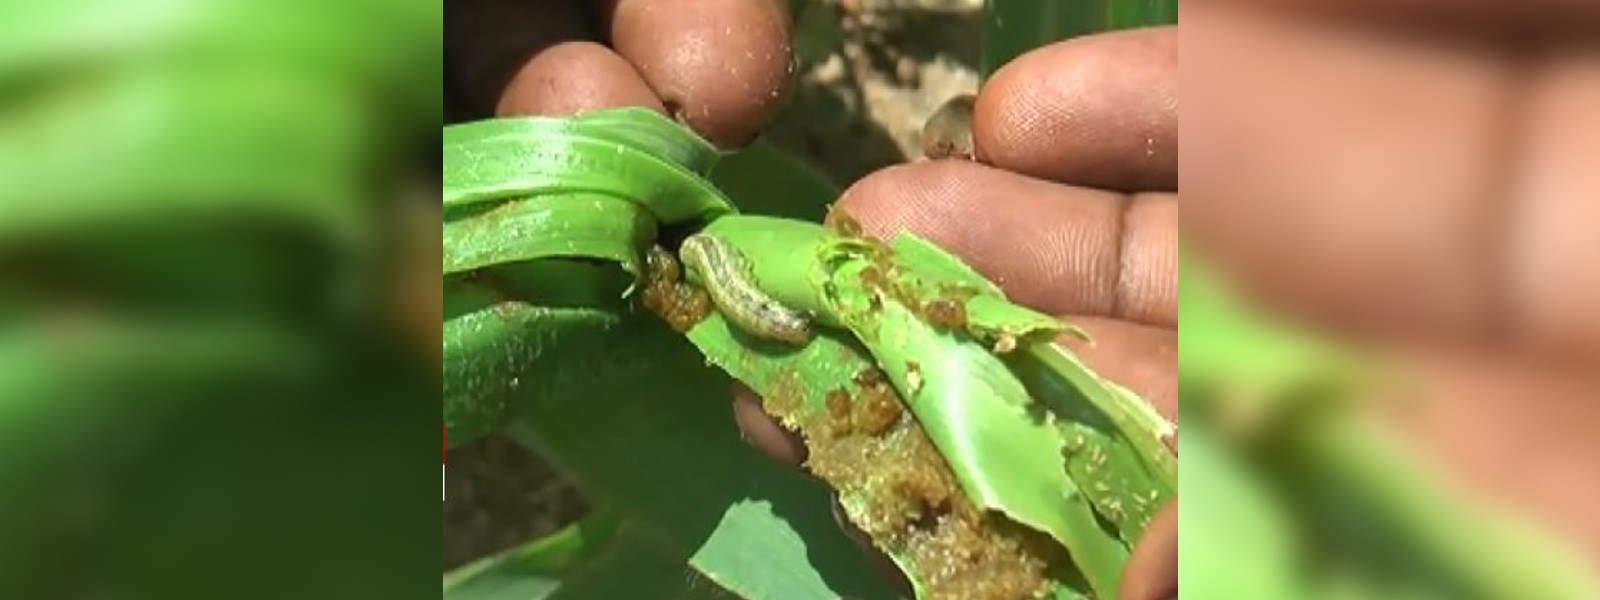 ‘Sena’ caterpillar continues to wreak havoc in the country